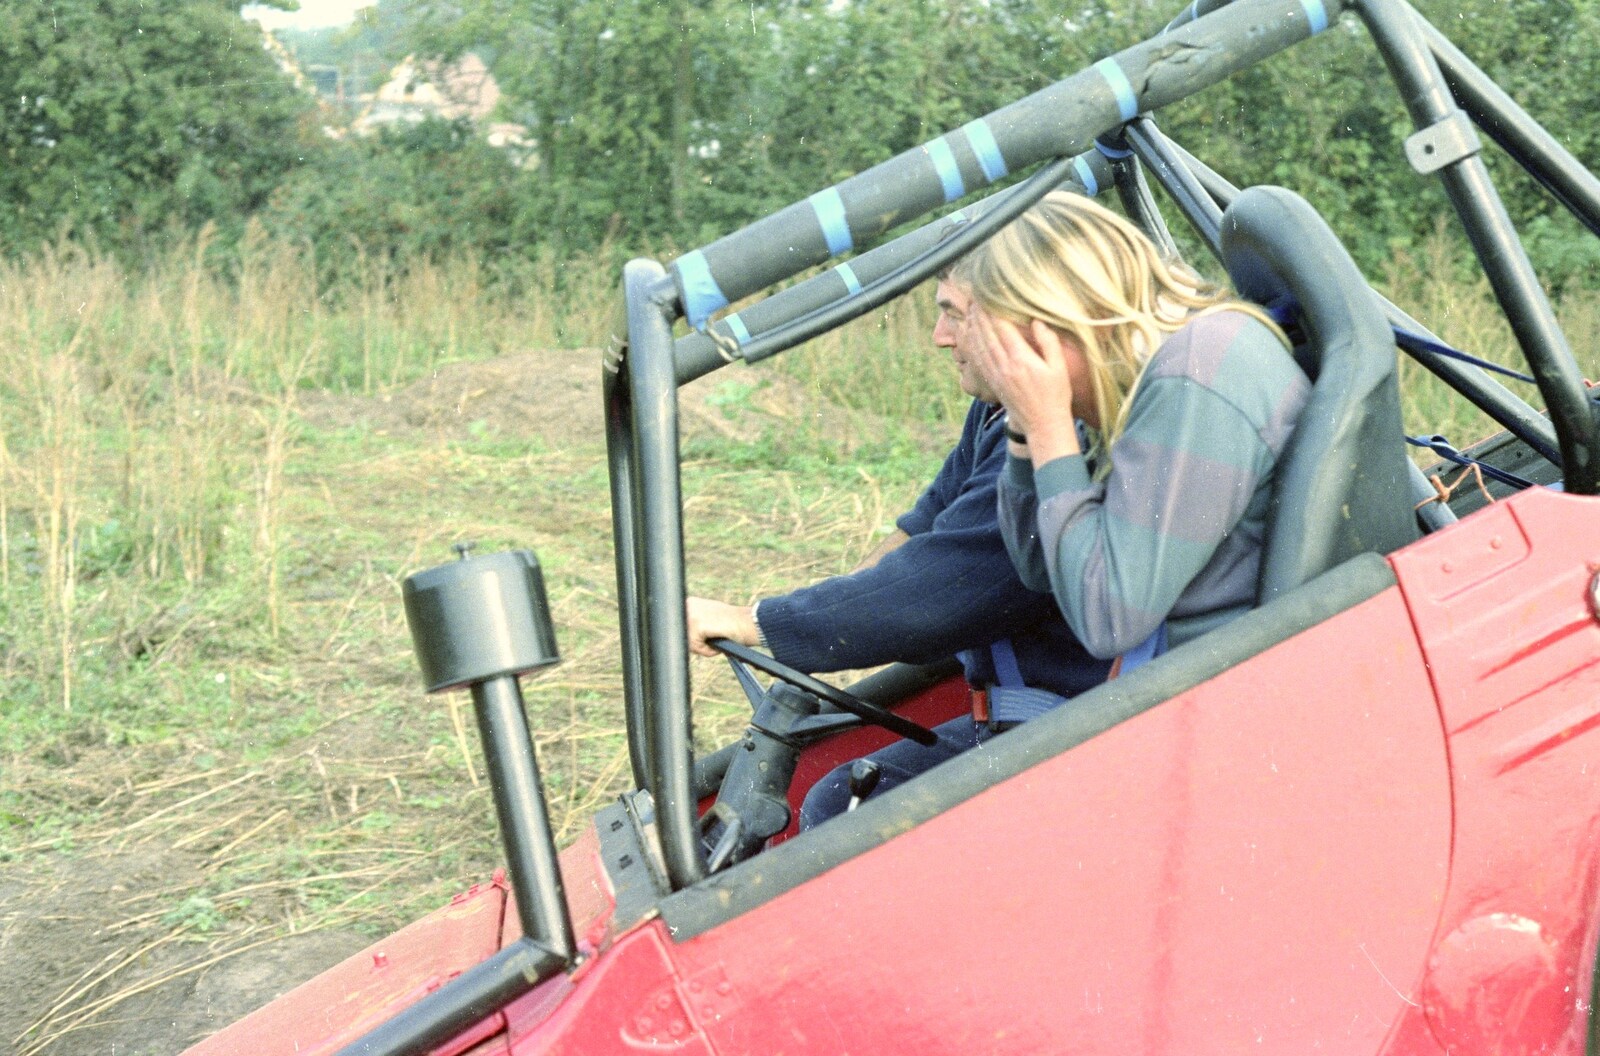 Cider Making (without Rosie), Stuston, Suffolk - 23rd September 1994: Sue covers her eyes in panic